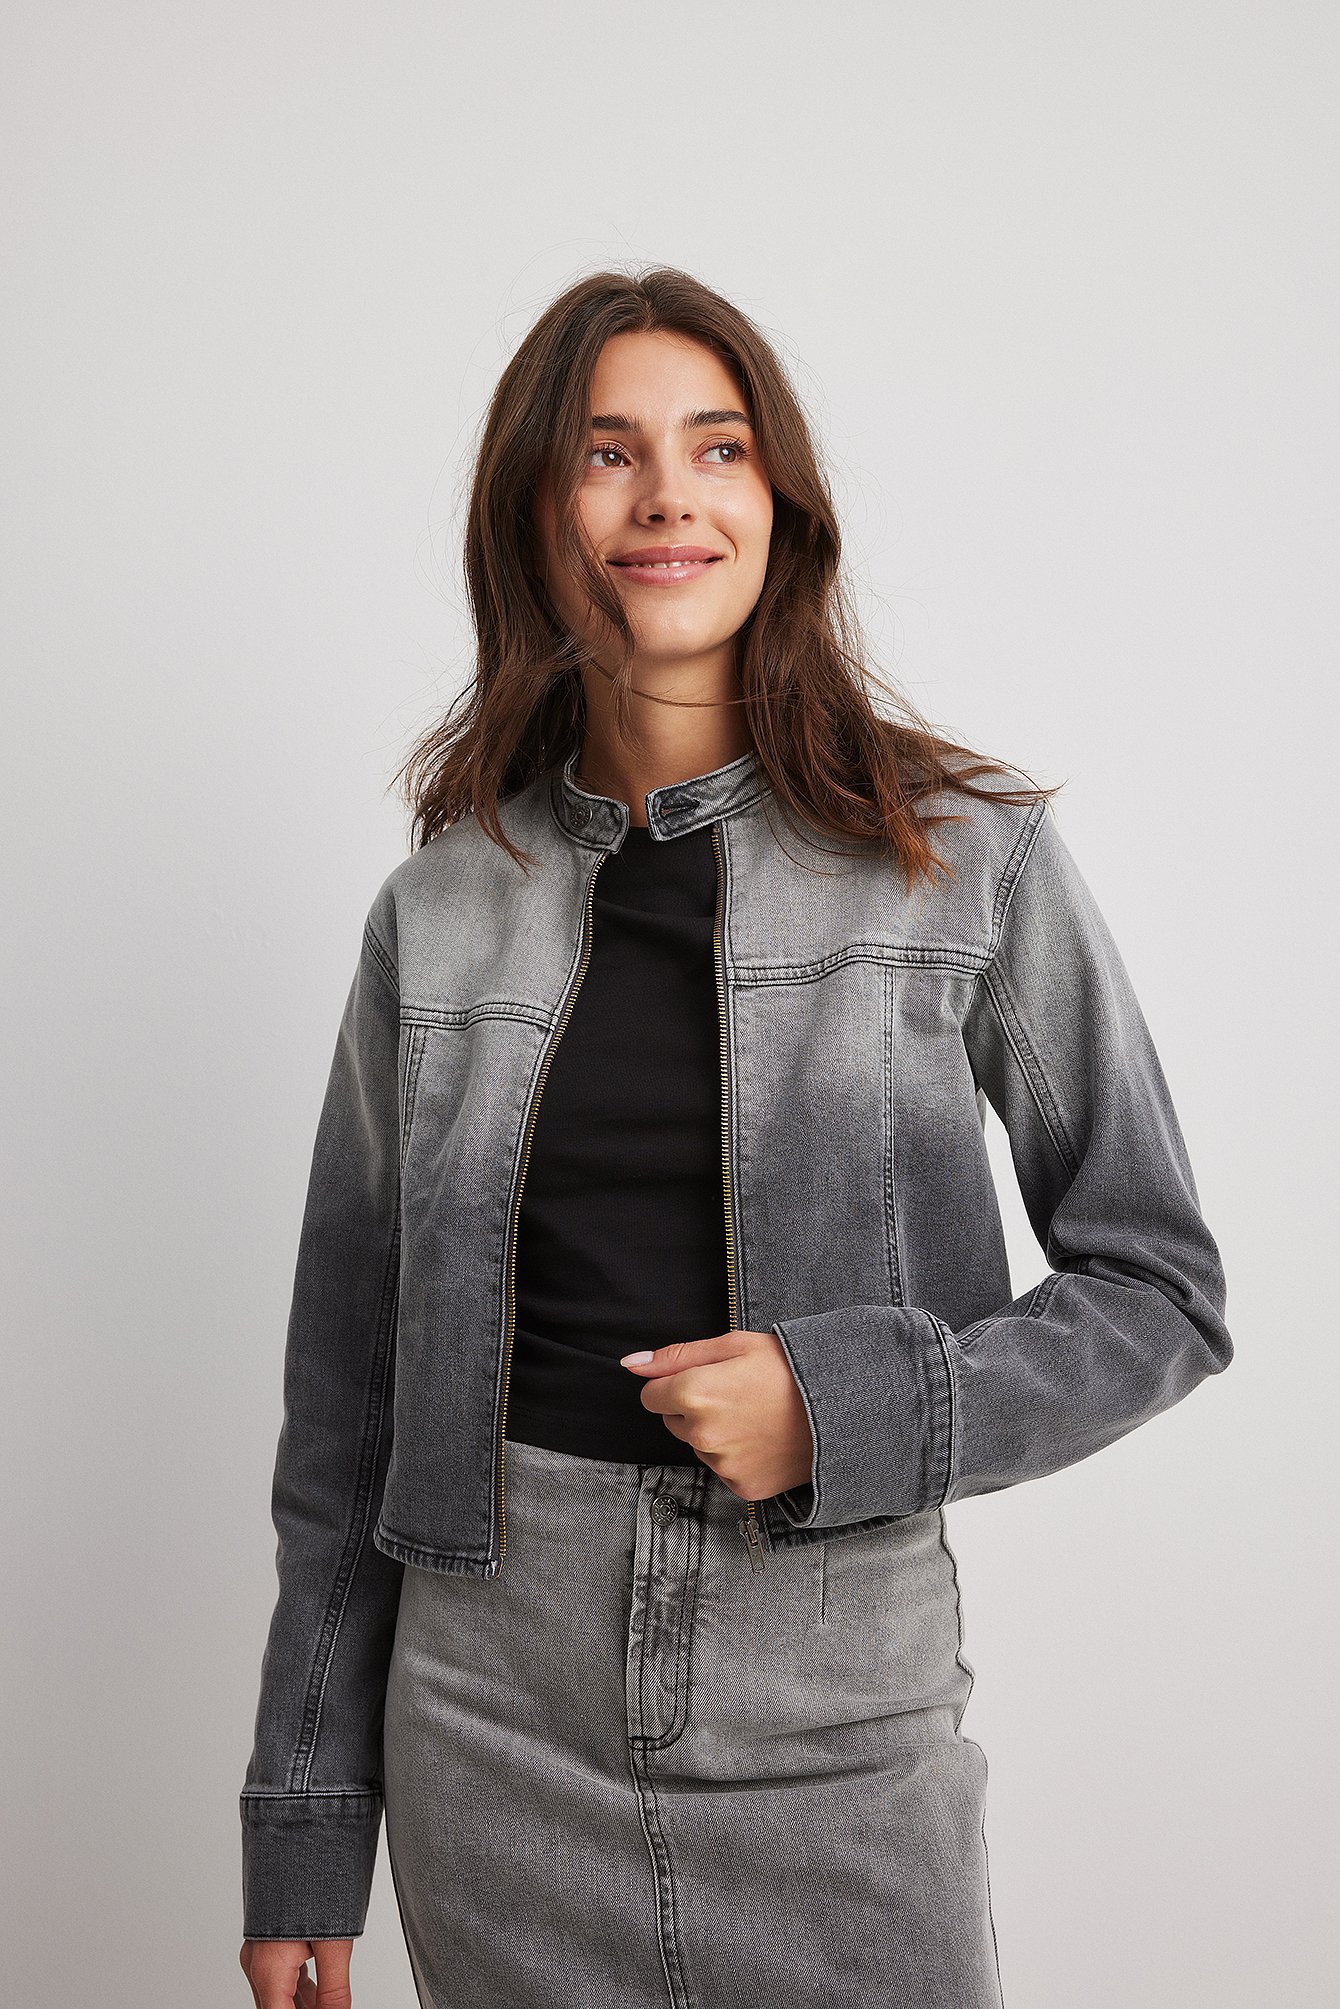 Derby Wash The Slouchy Jean Jacket | THE GREAT.